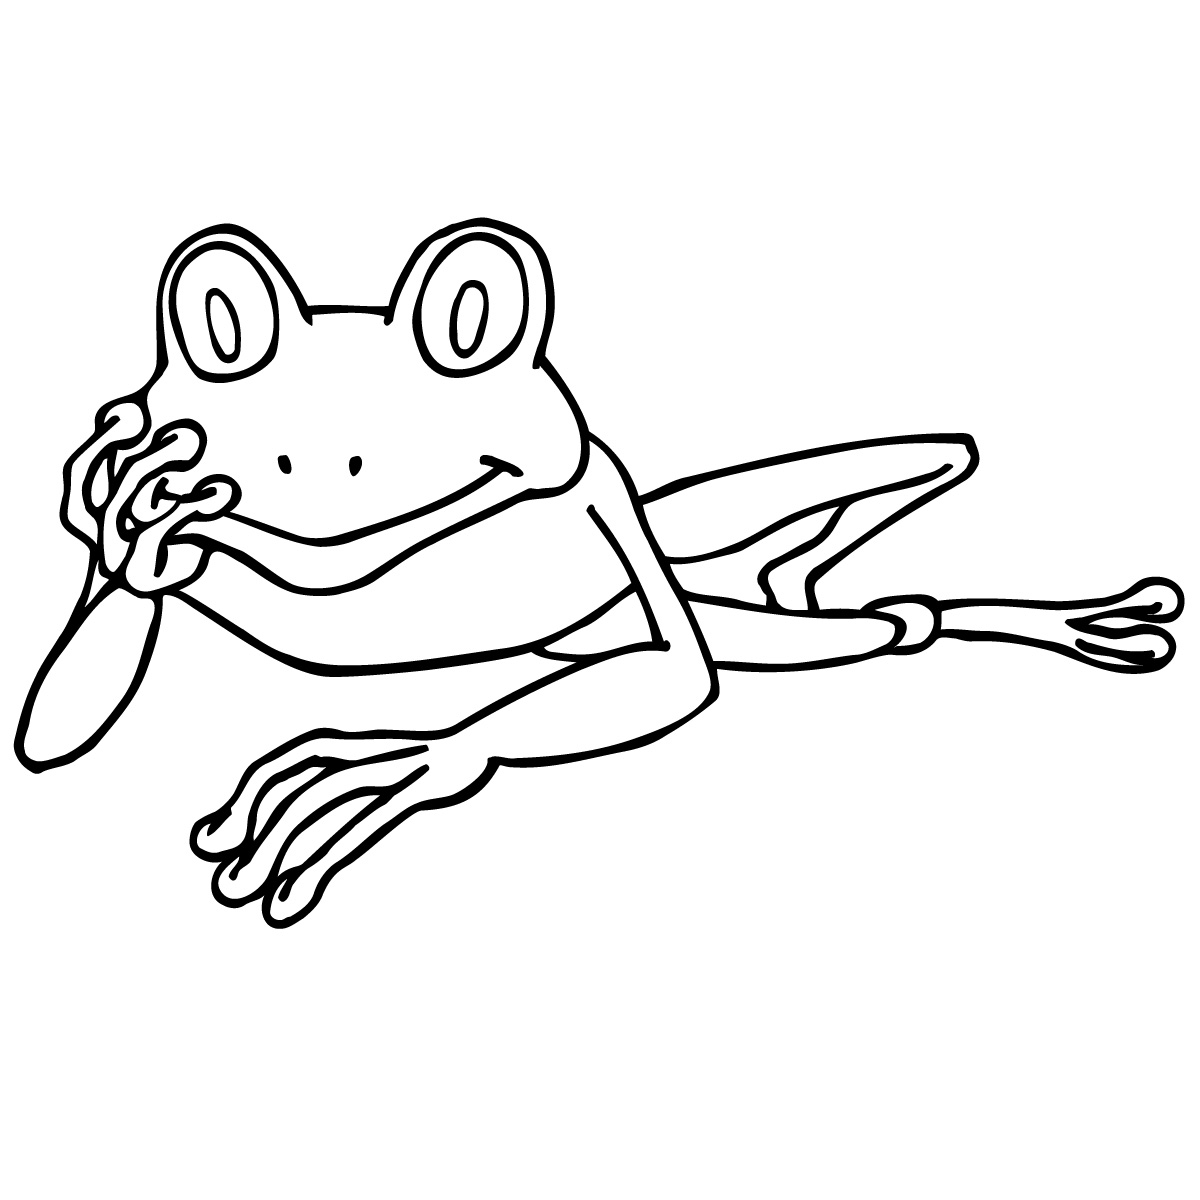 Tree Frog Clip Art Black And White | Clipart library - Free Clipart 